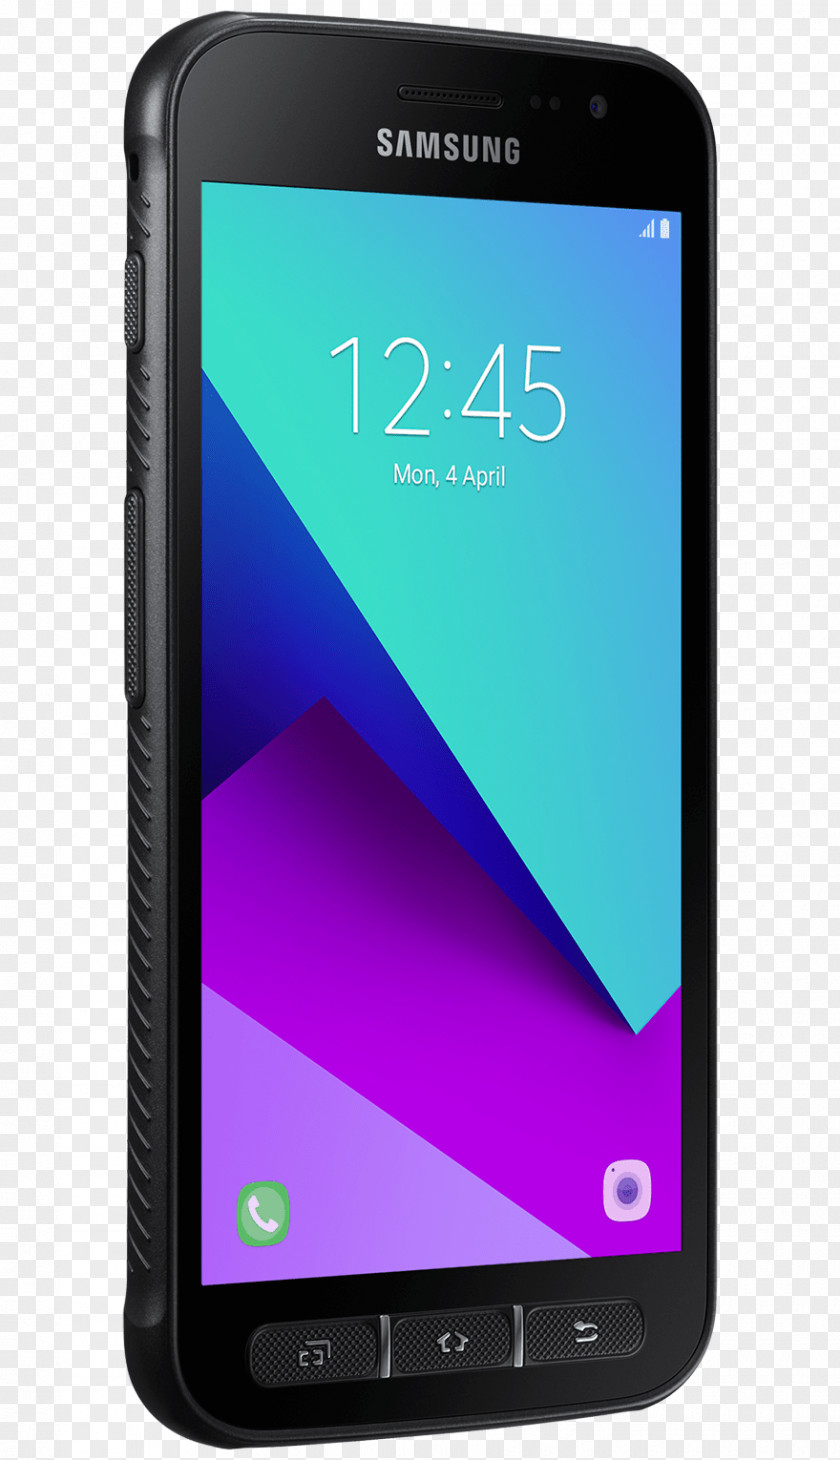 Samsung Galaxy Xcover 3 J2 Prime Android PNG